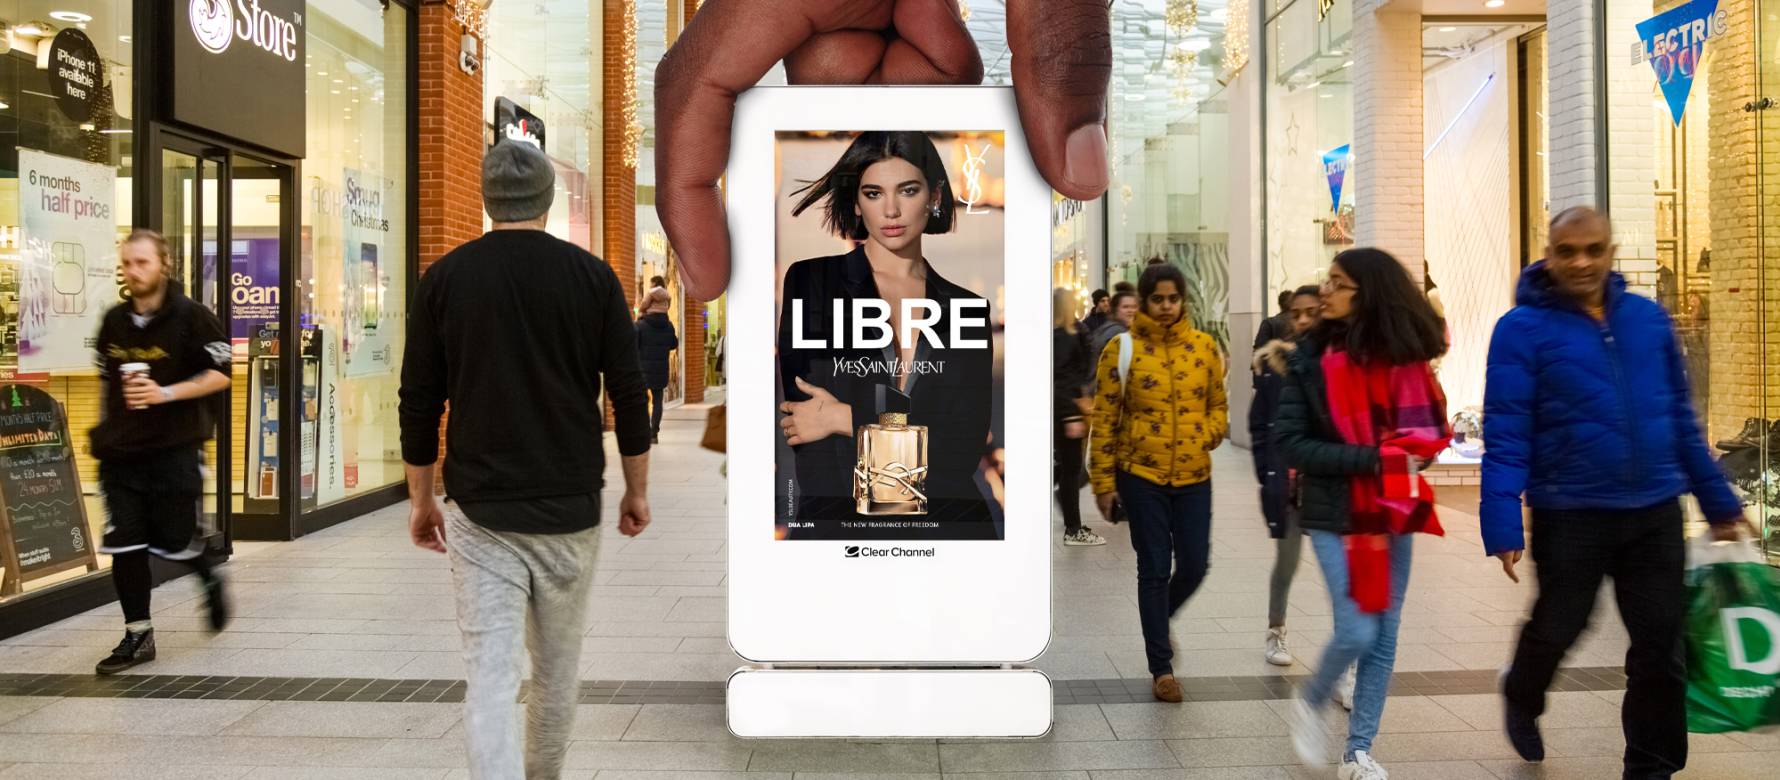 Digital screen in a shopping mall showing Yes Saint Laurent LIBRE advert